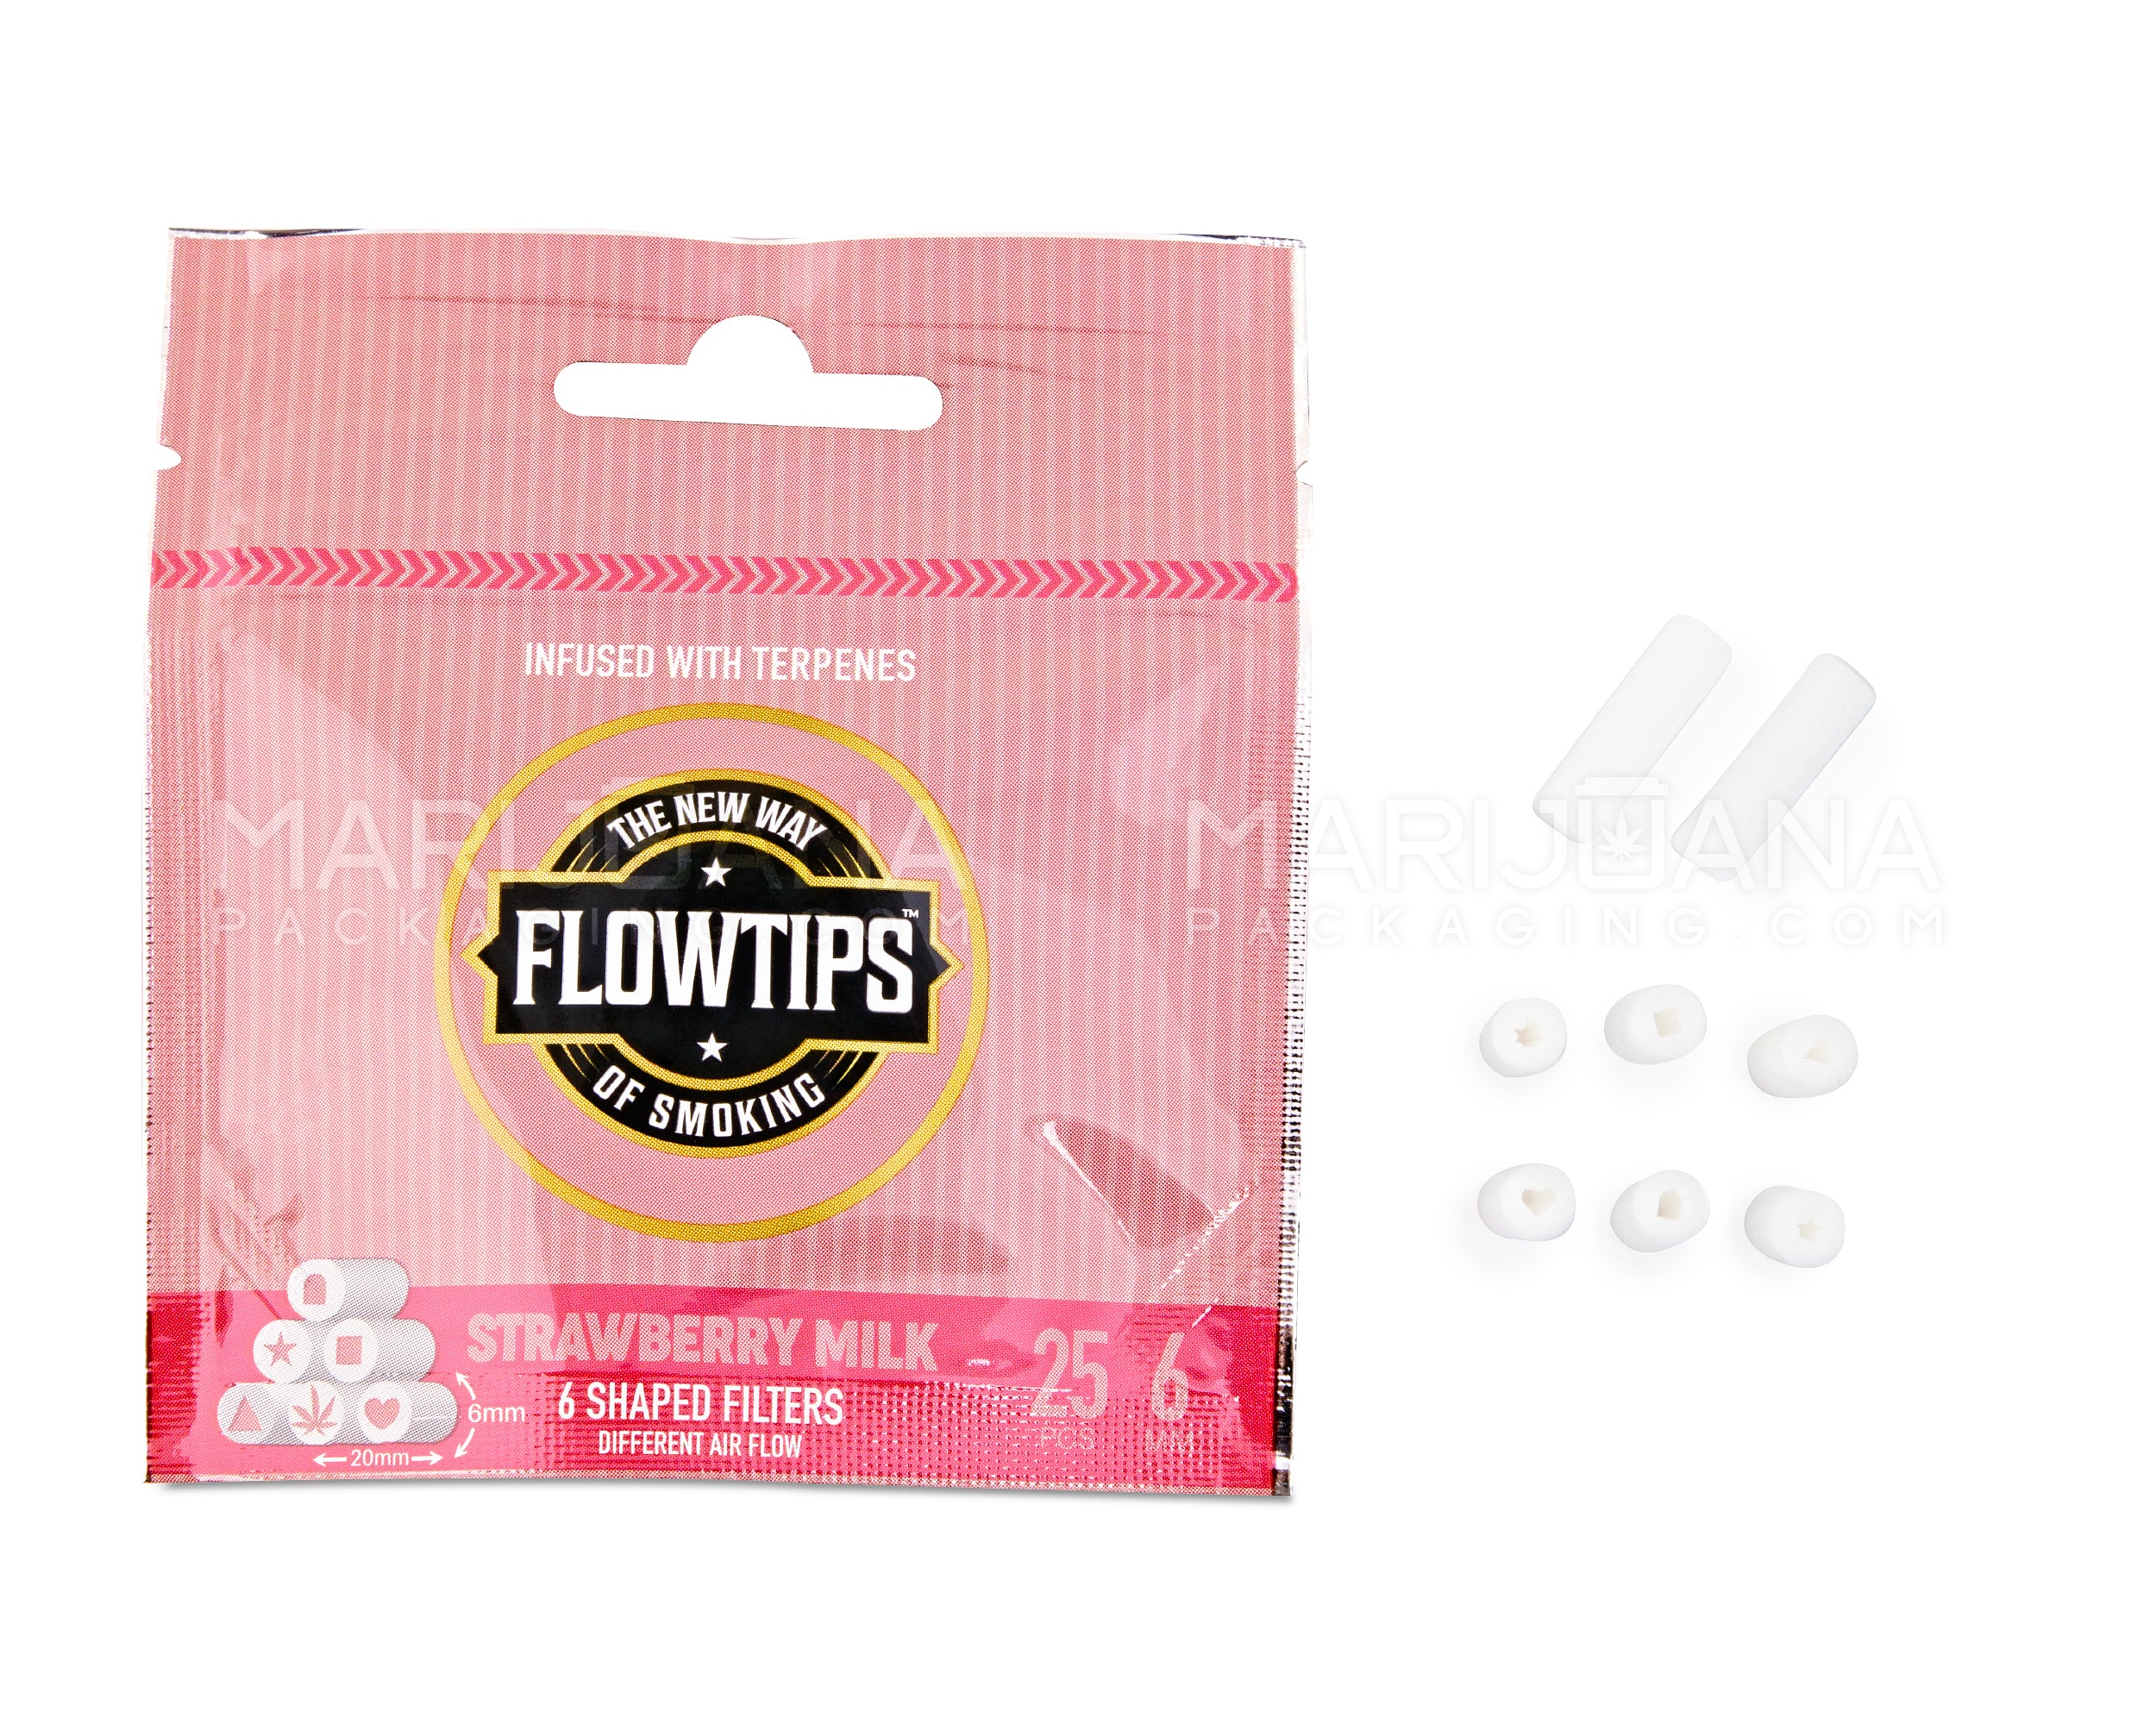 FLOWTIPS | 'Retail Display' Terpene-Infused Filter Tips | 20mm - Strawberry Milk - 10 Count